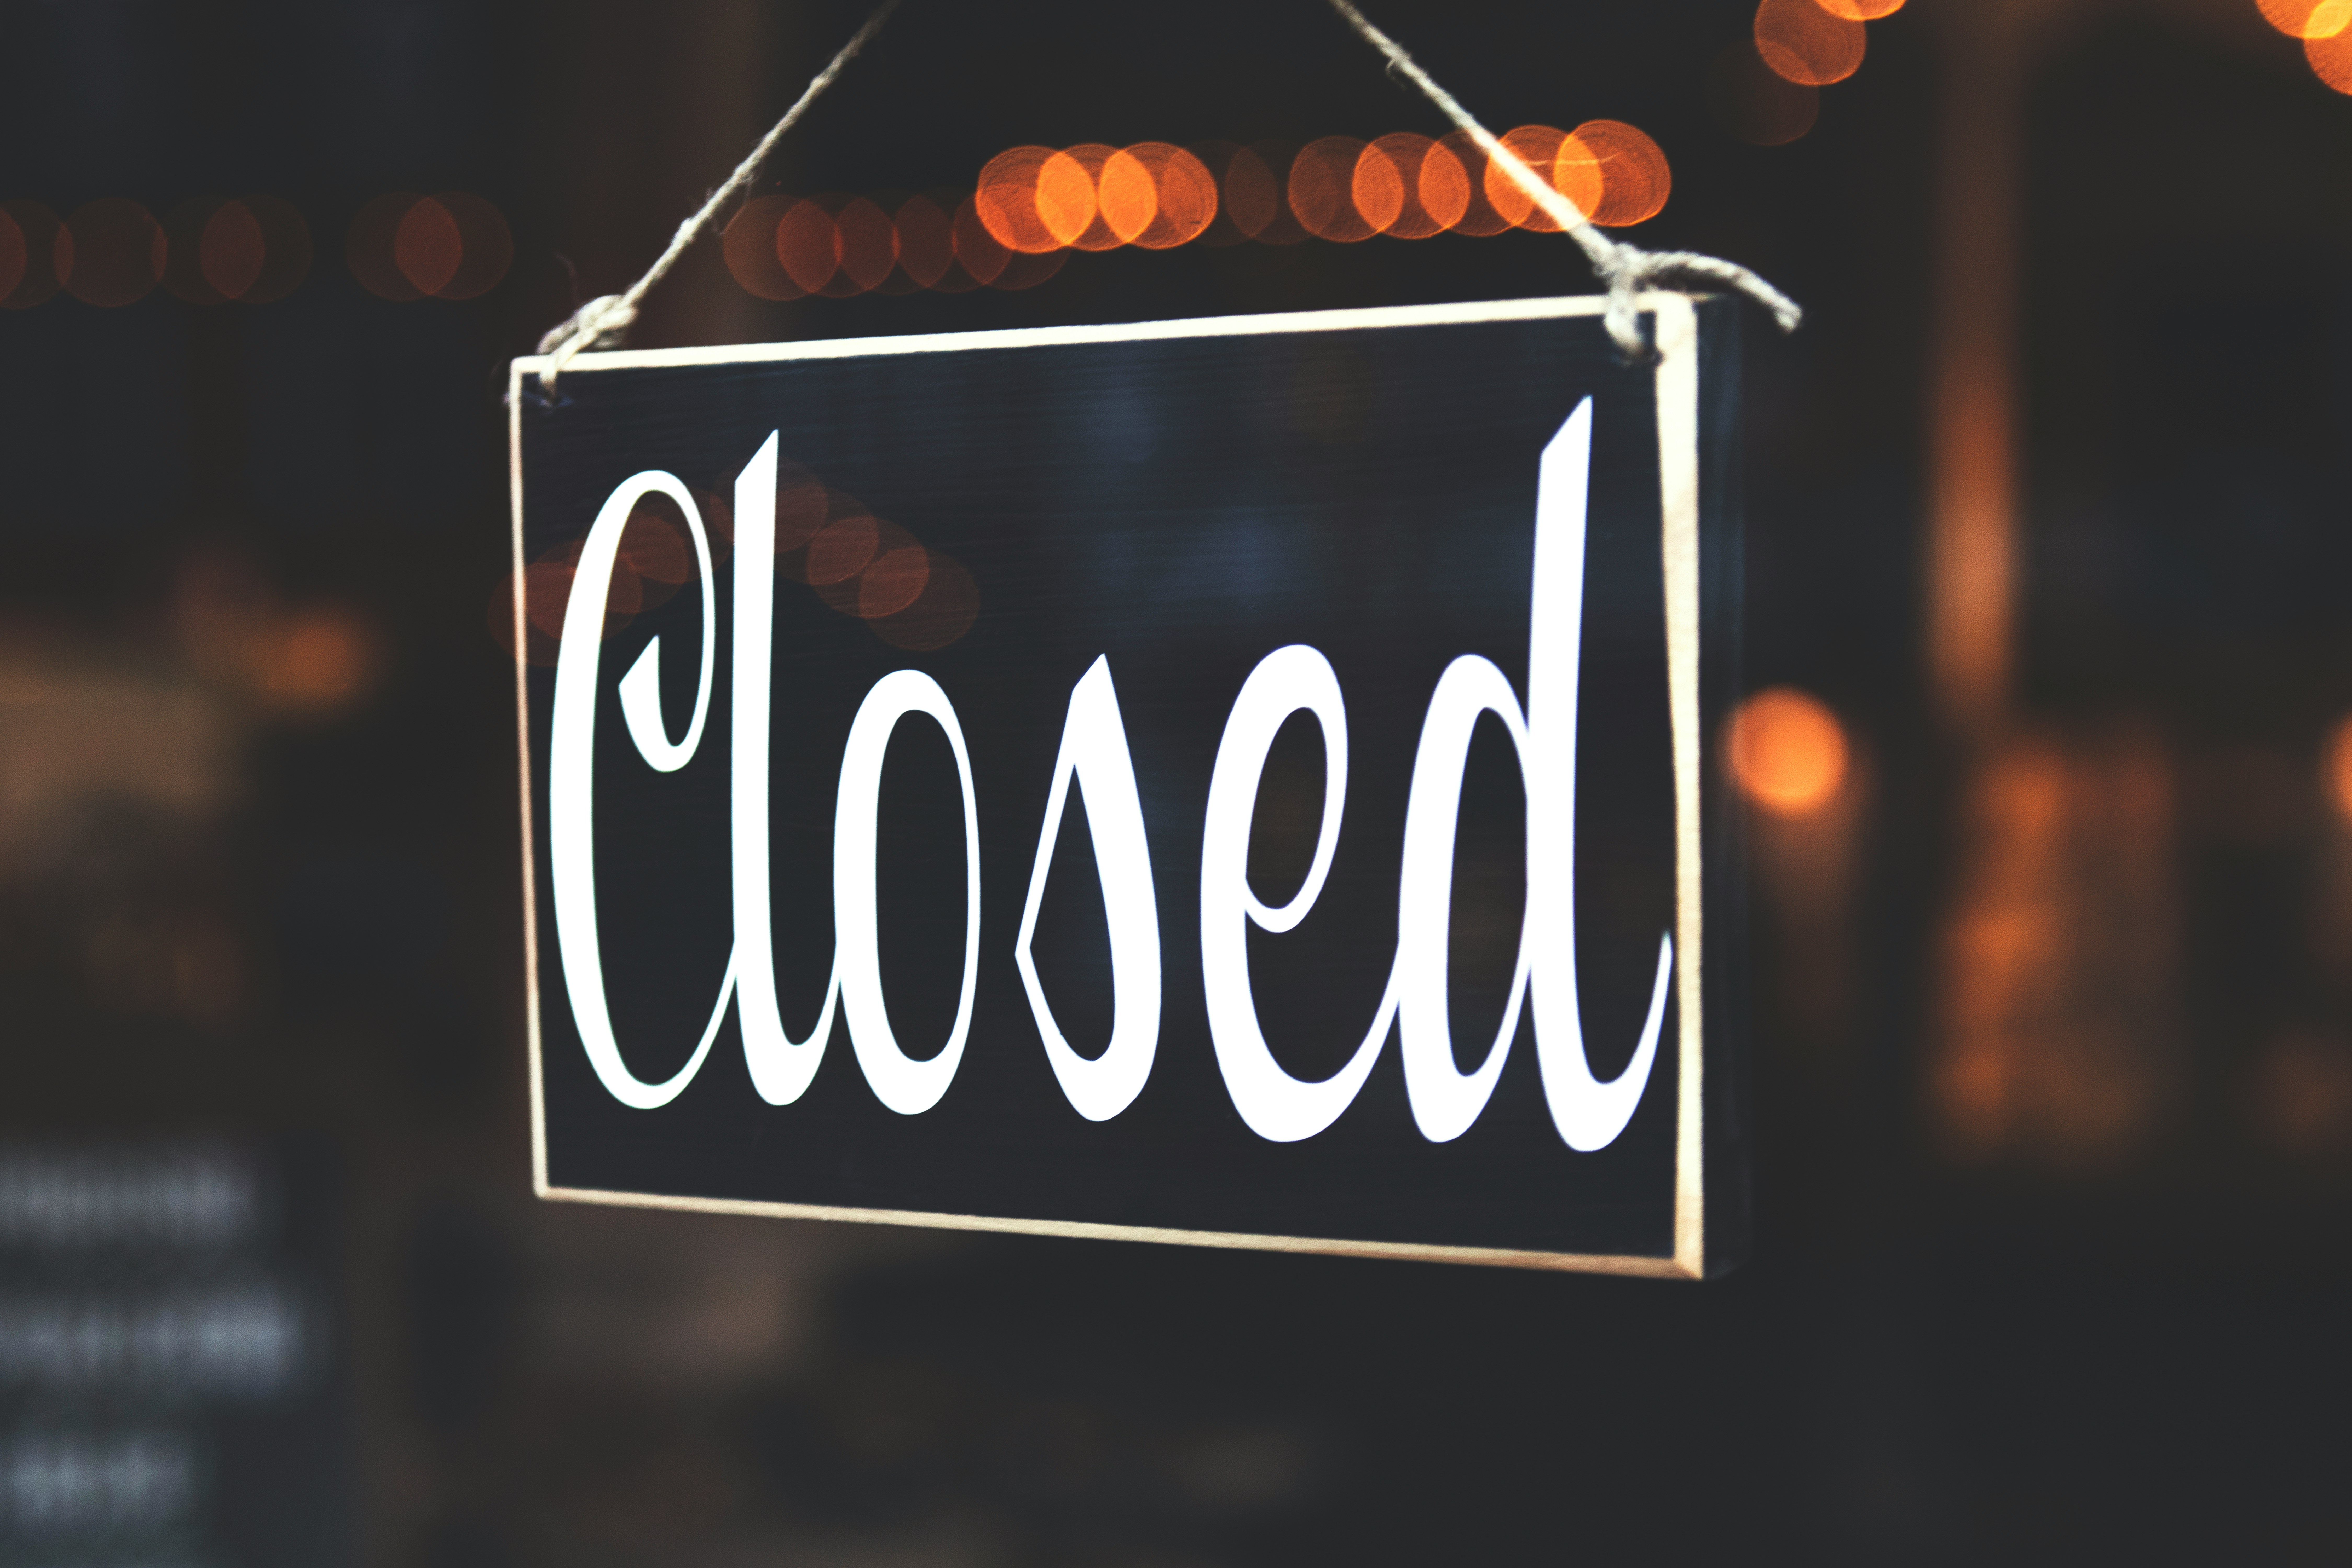 A black sign hangs in a window with the word "closed" in white and blurred orange lights in the background.